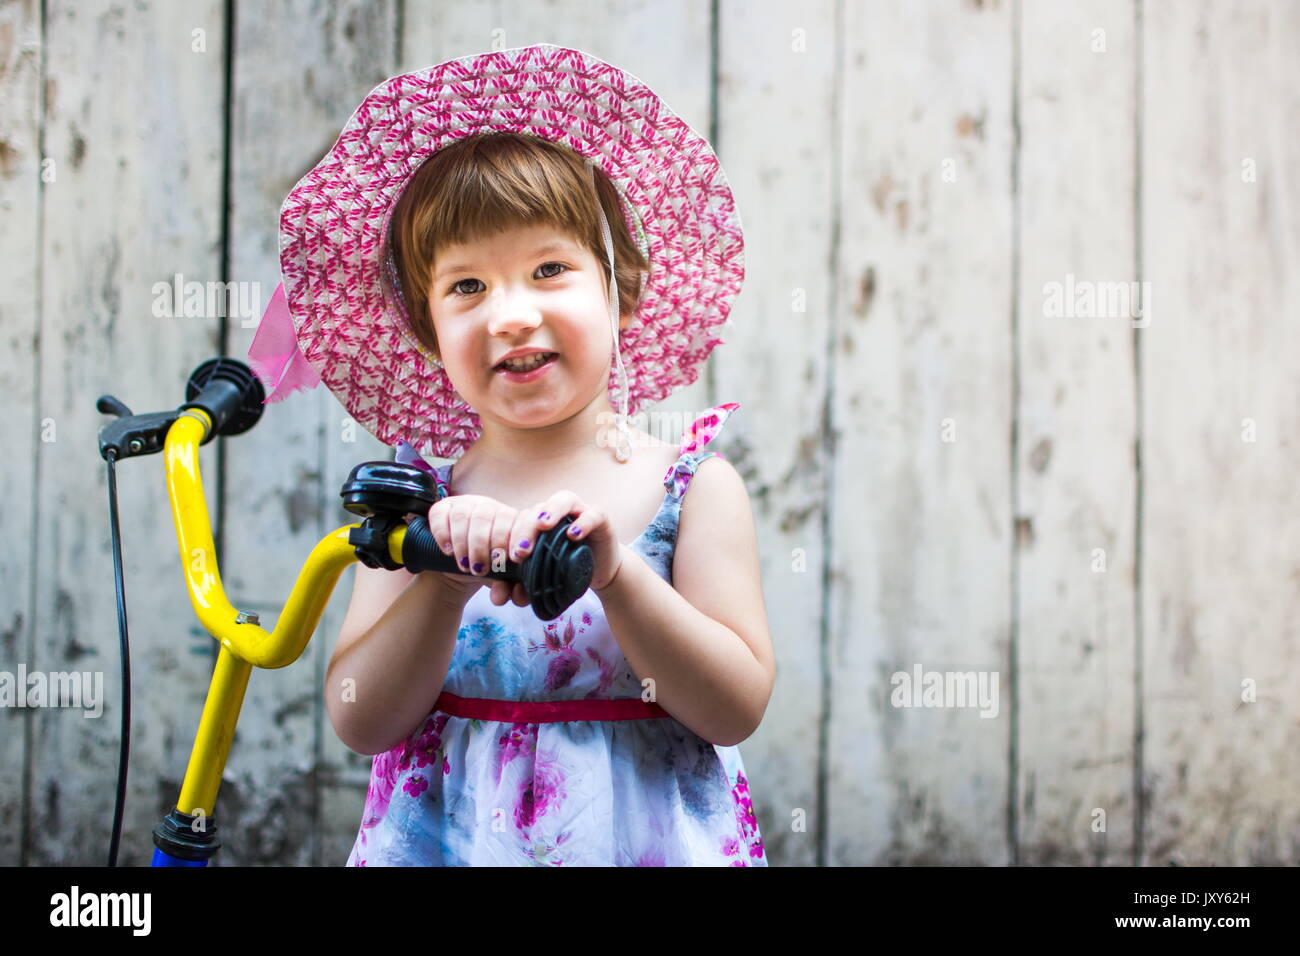 Cute girl with bicycle against vintage wooden backdrop Stock Photo